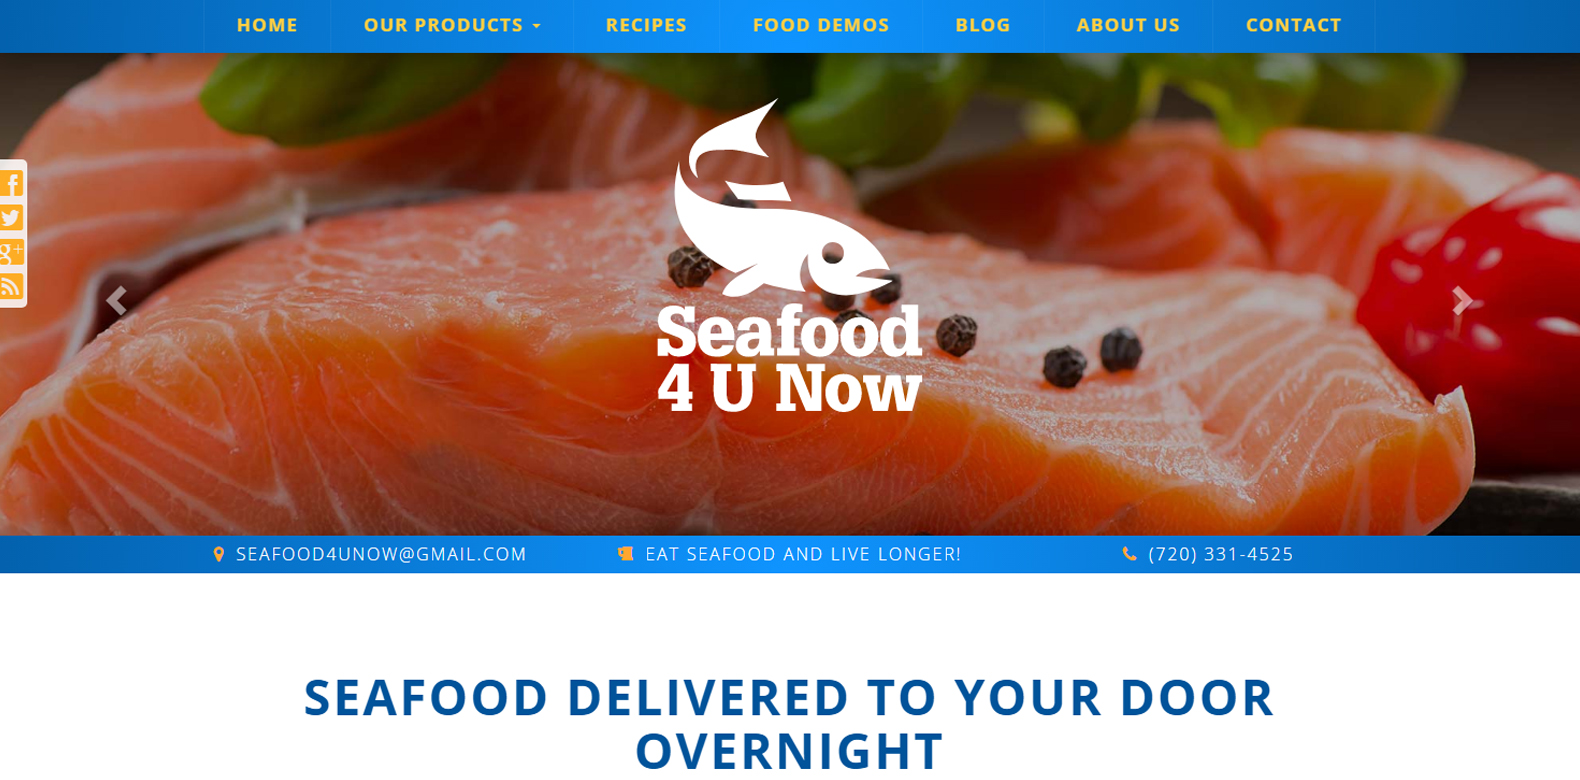 
New Website Launch: Seafood 4 U Now